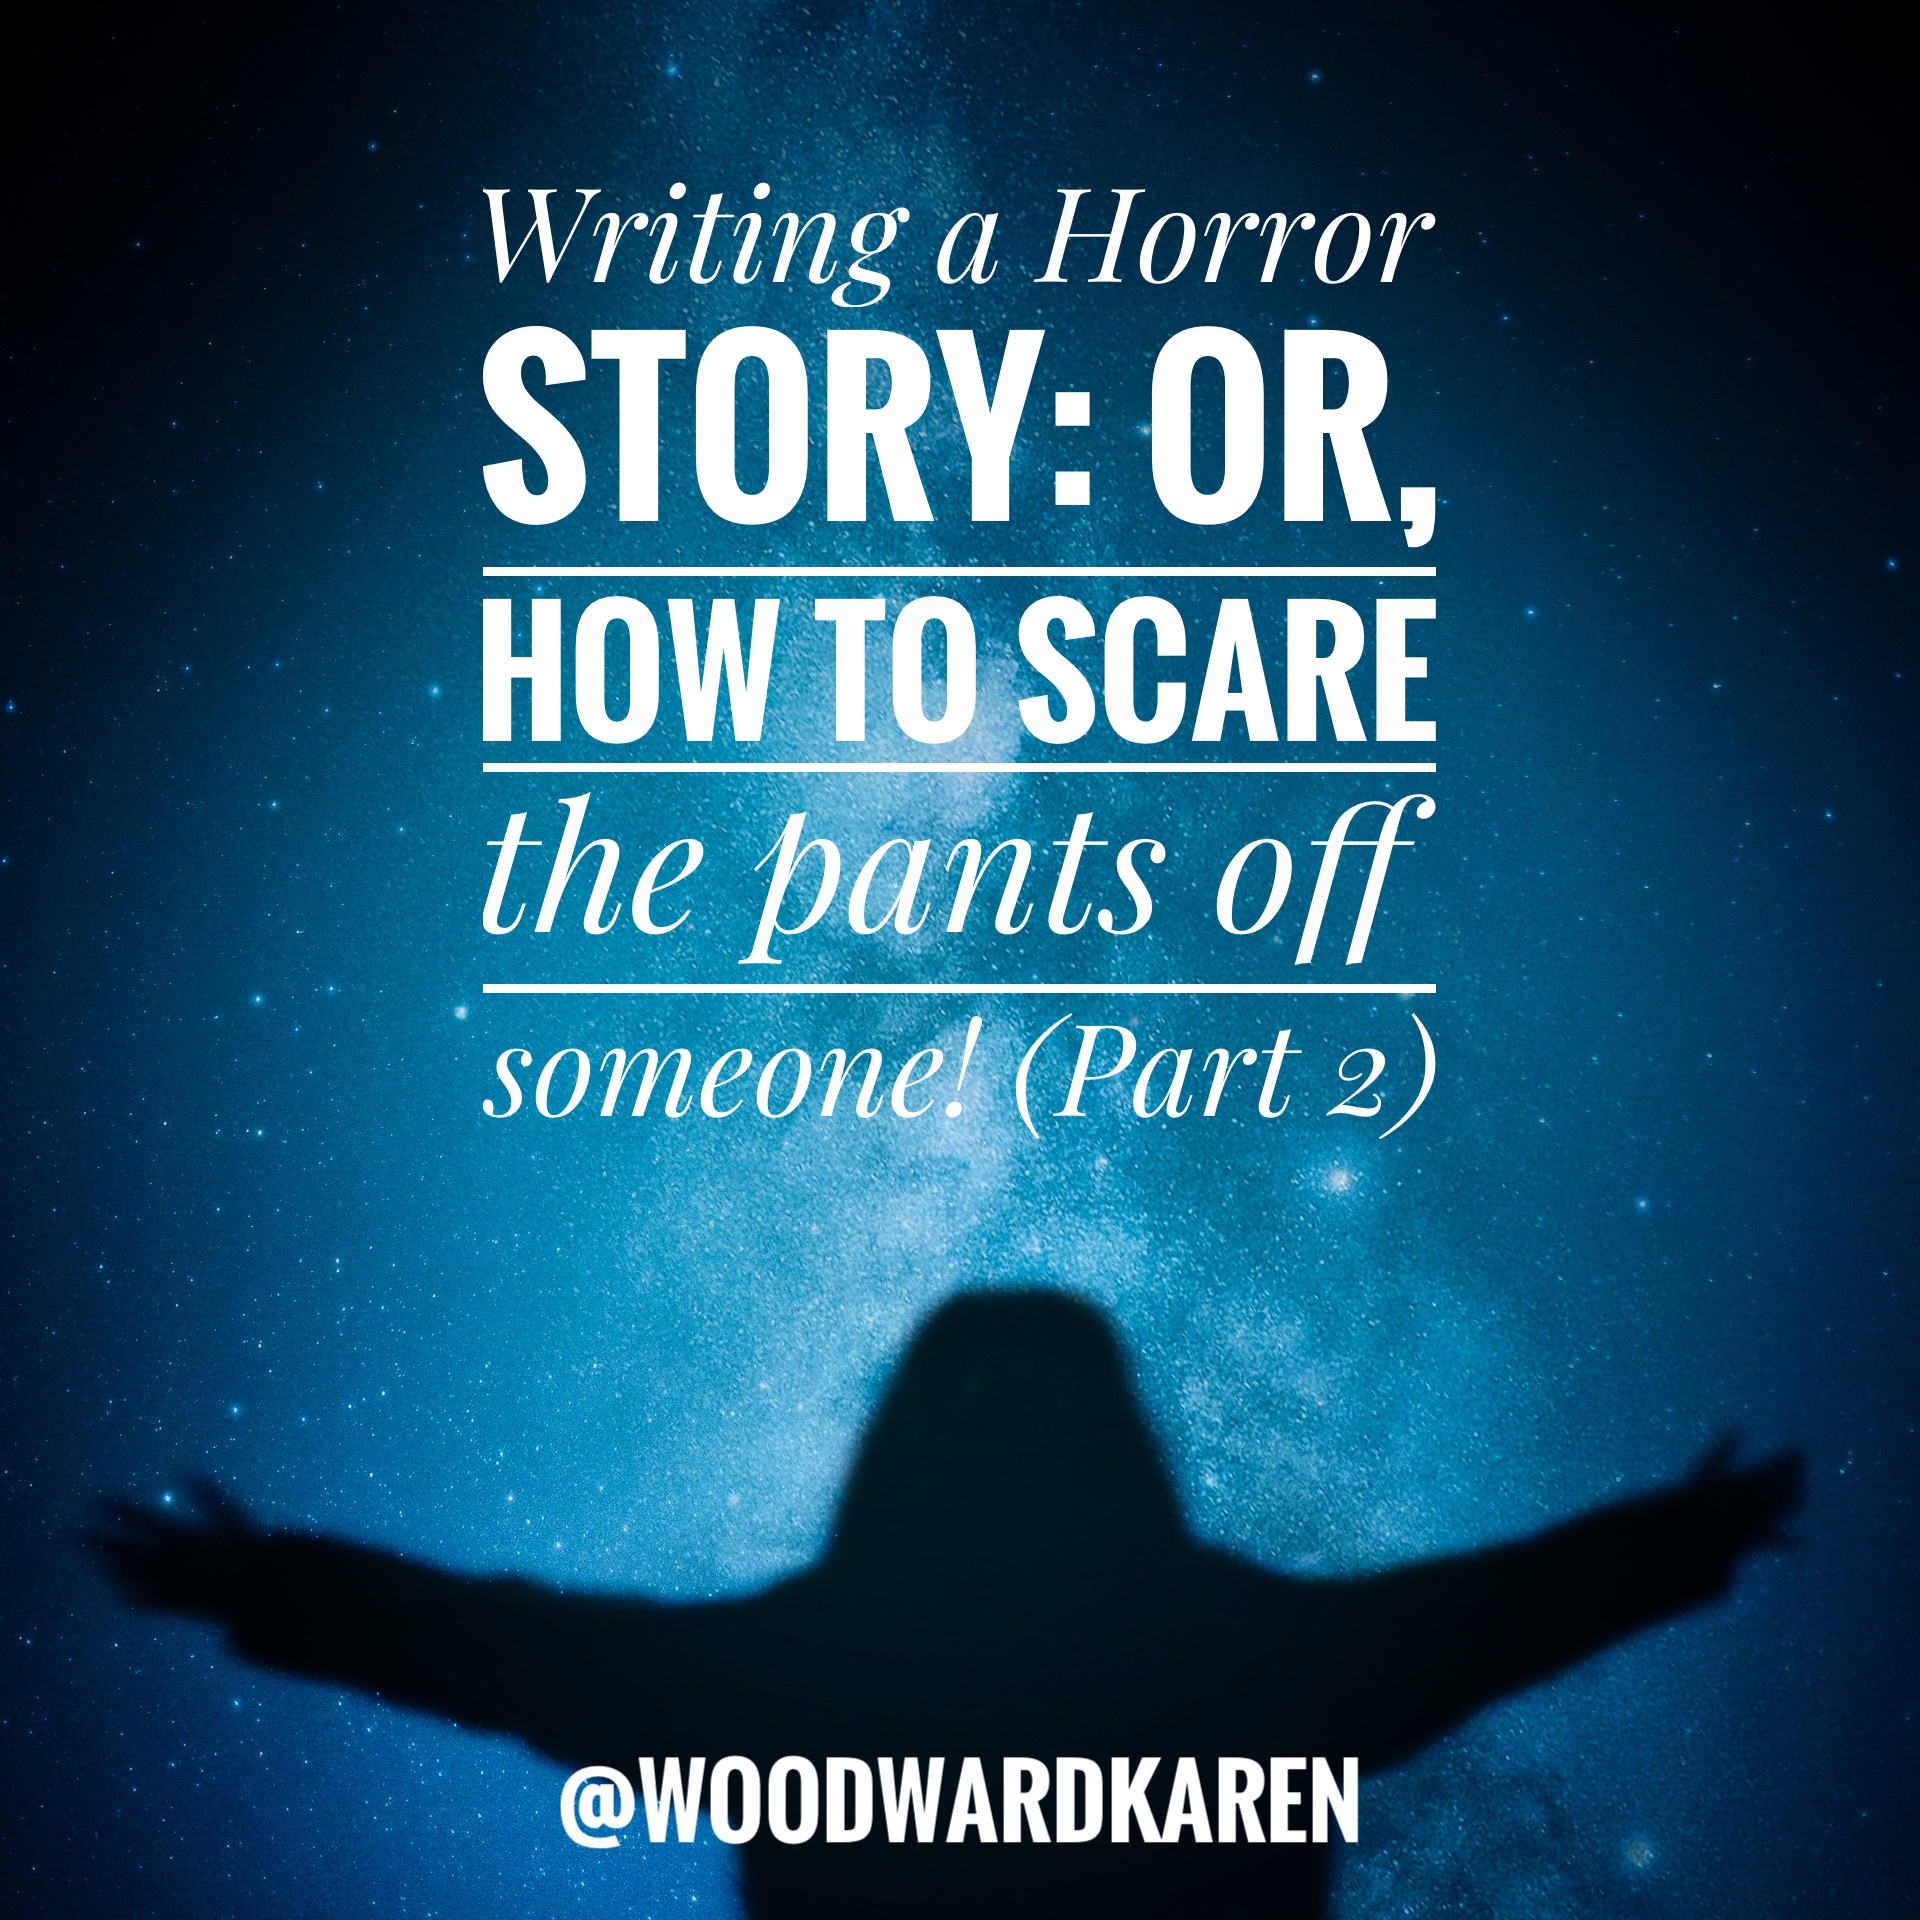 Karen Woodward: Writing a Horror Story: Or, how to scare the pants